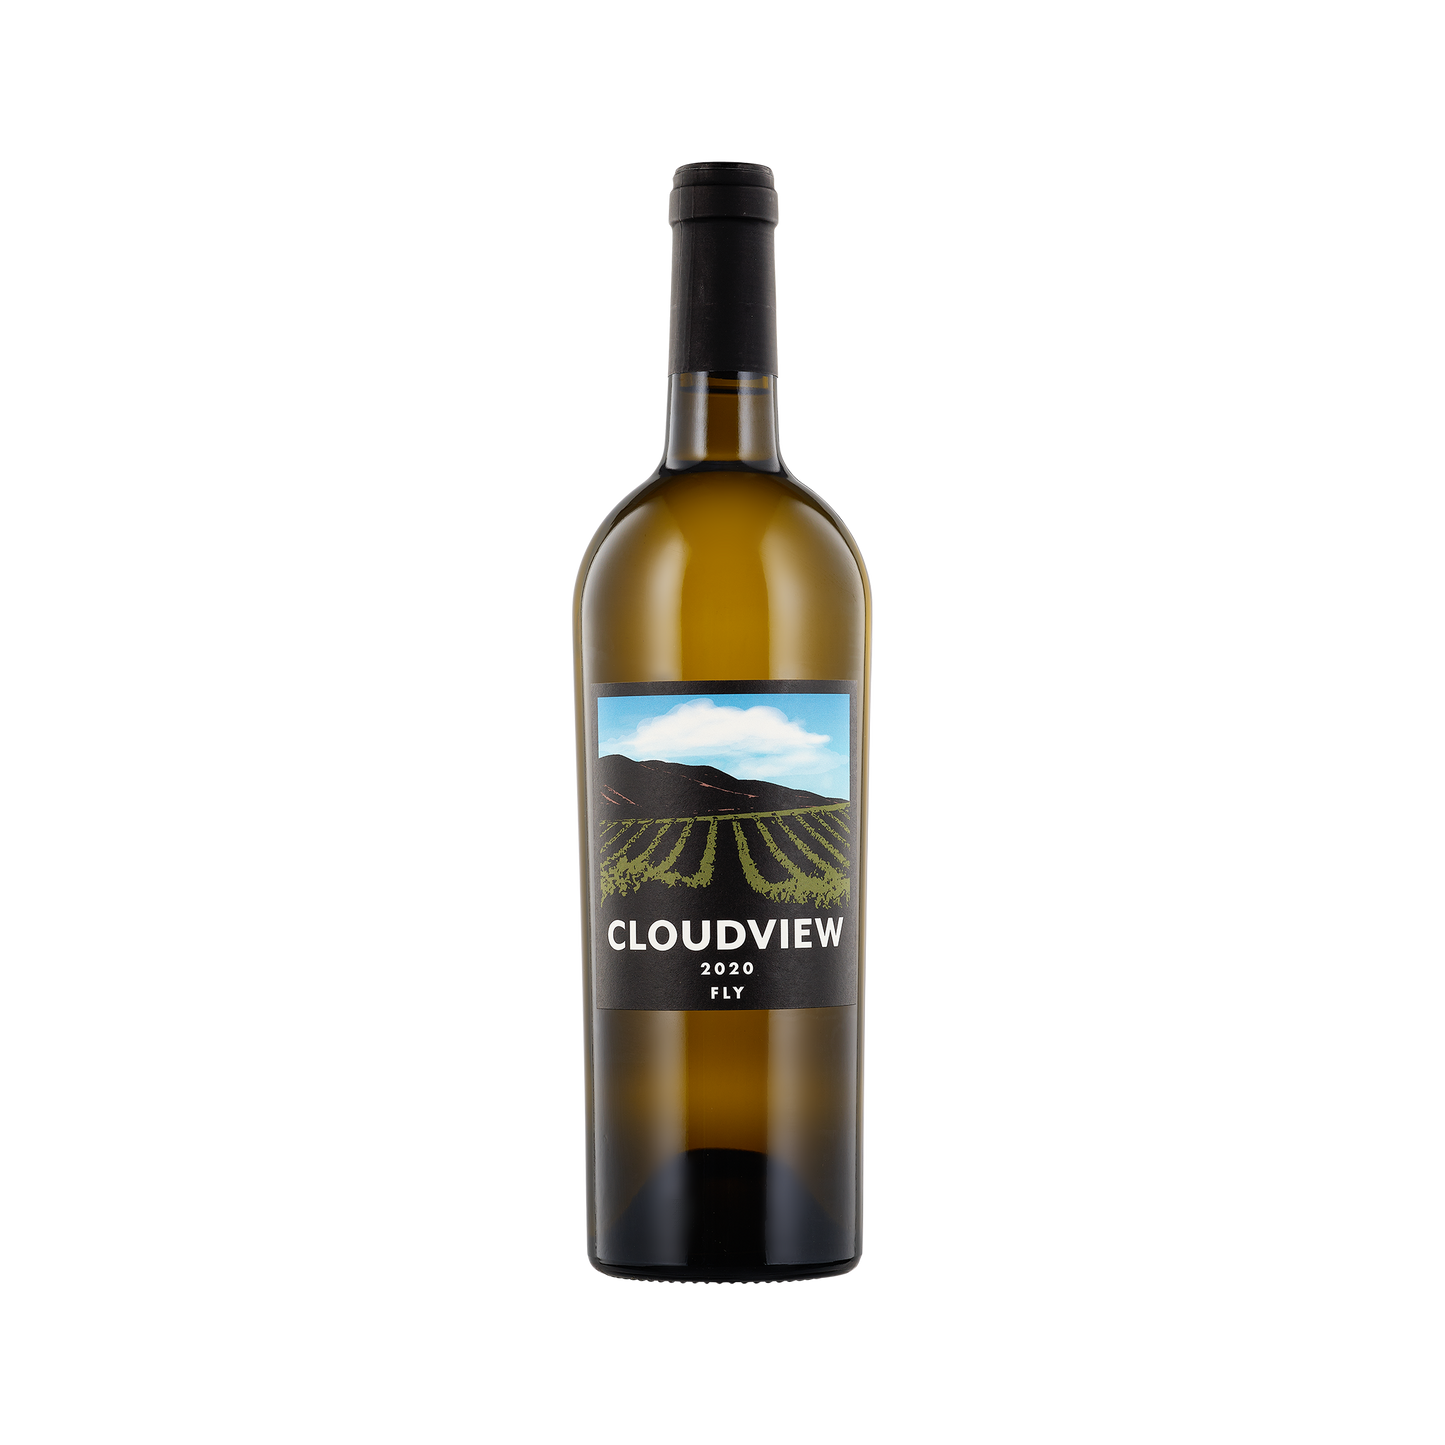 A bottle of Cloudview 2020 'Fly' Chardonnay